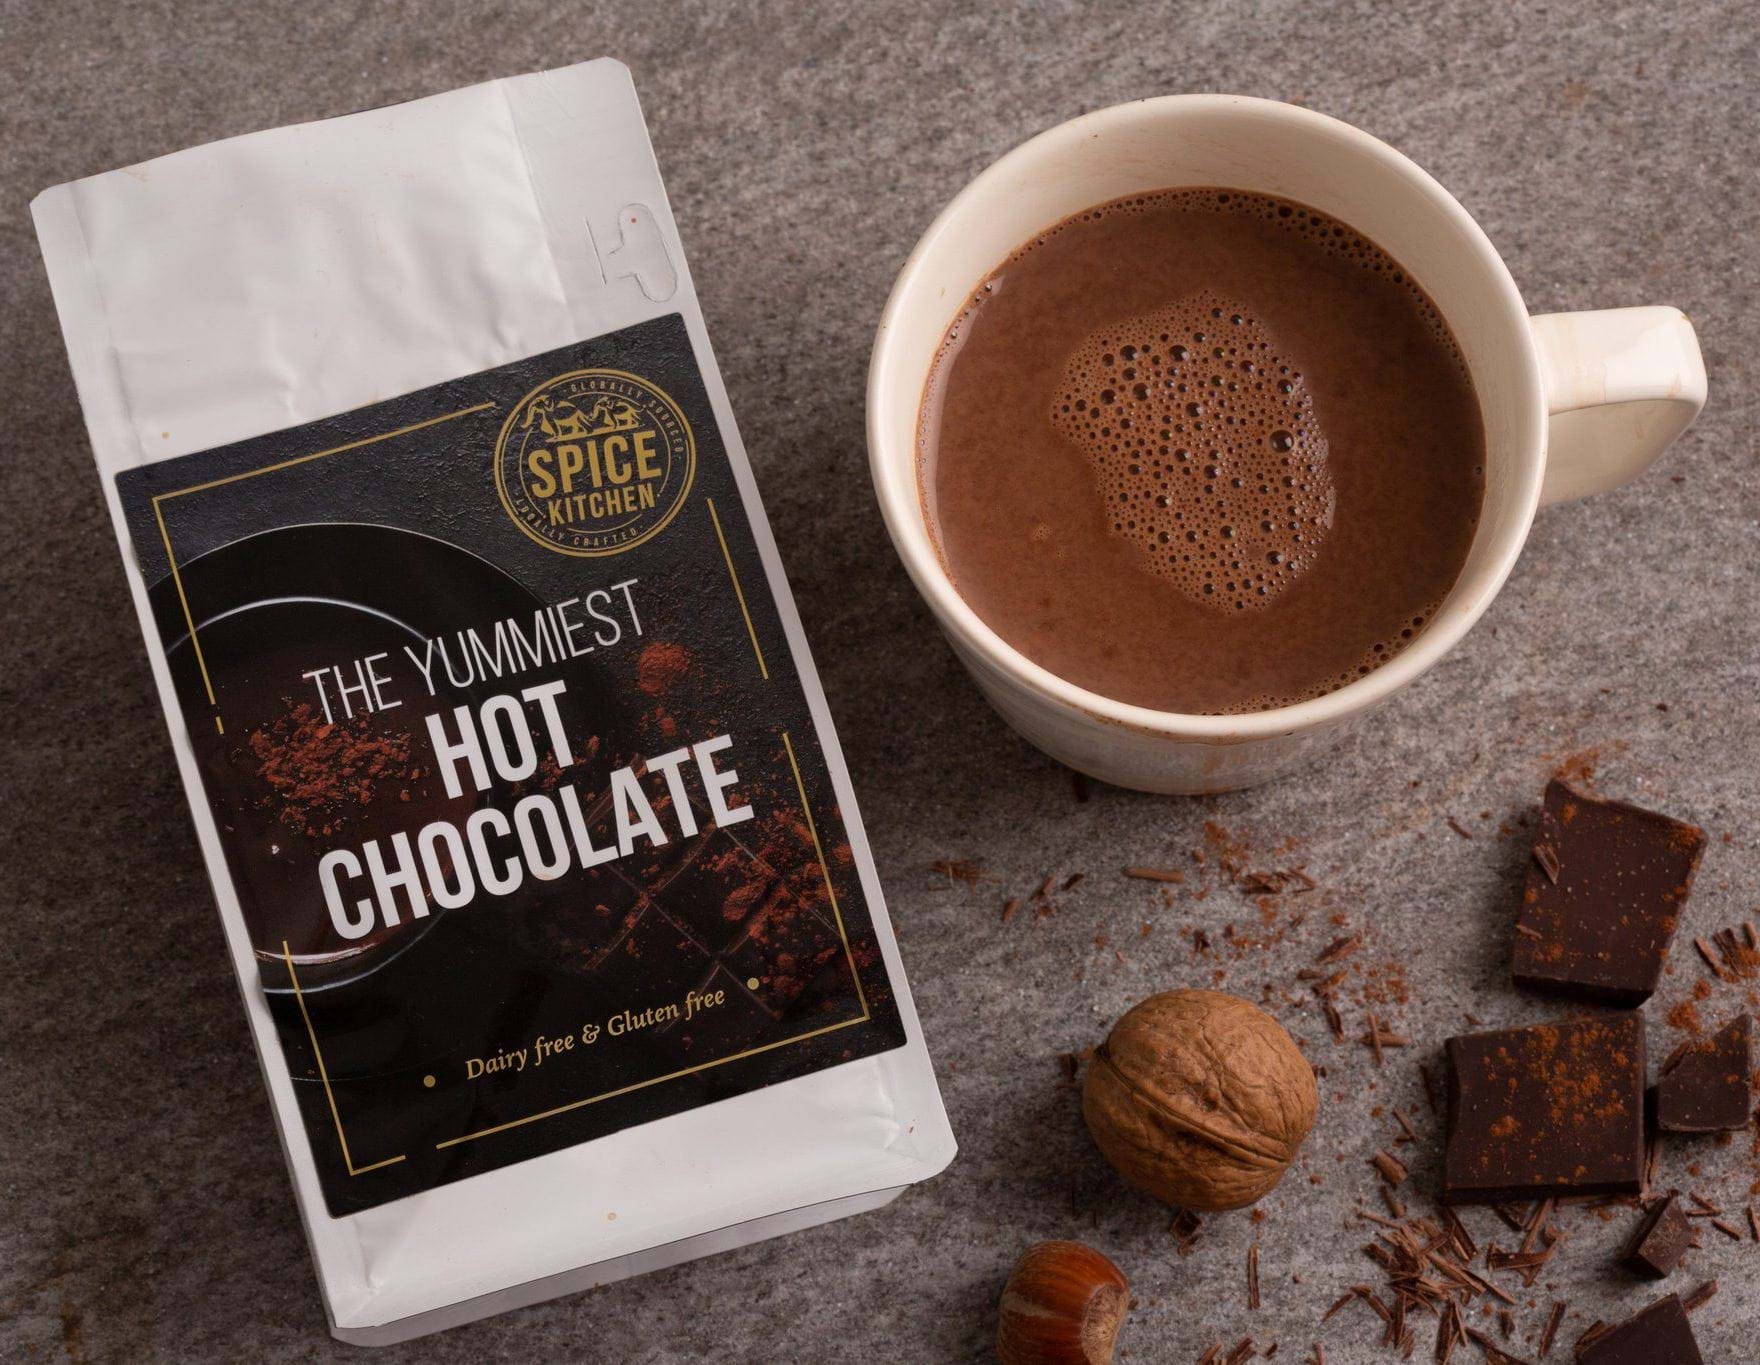 The Yummiest Hot Chocolate by Spice Kitchen